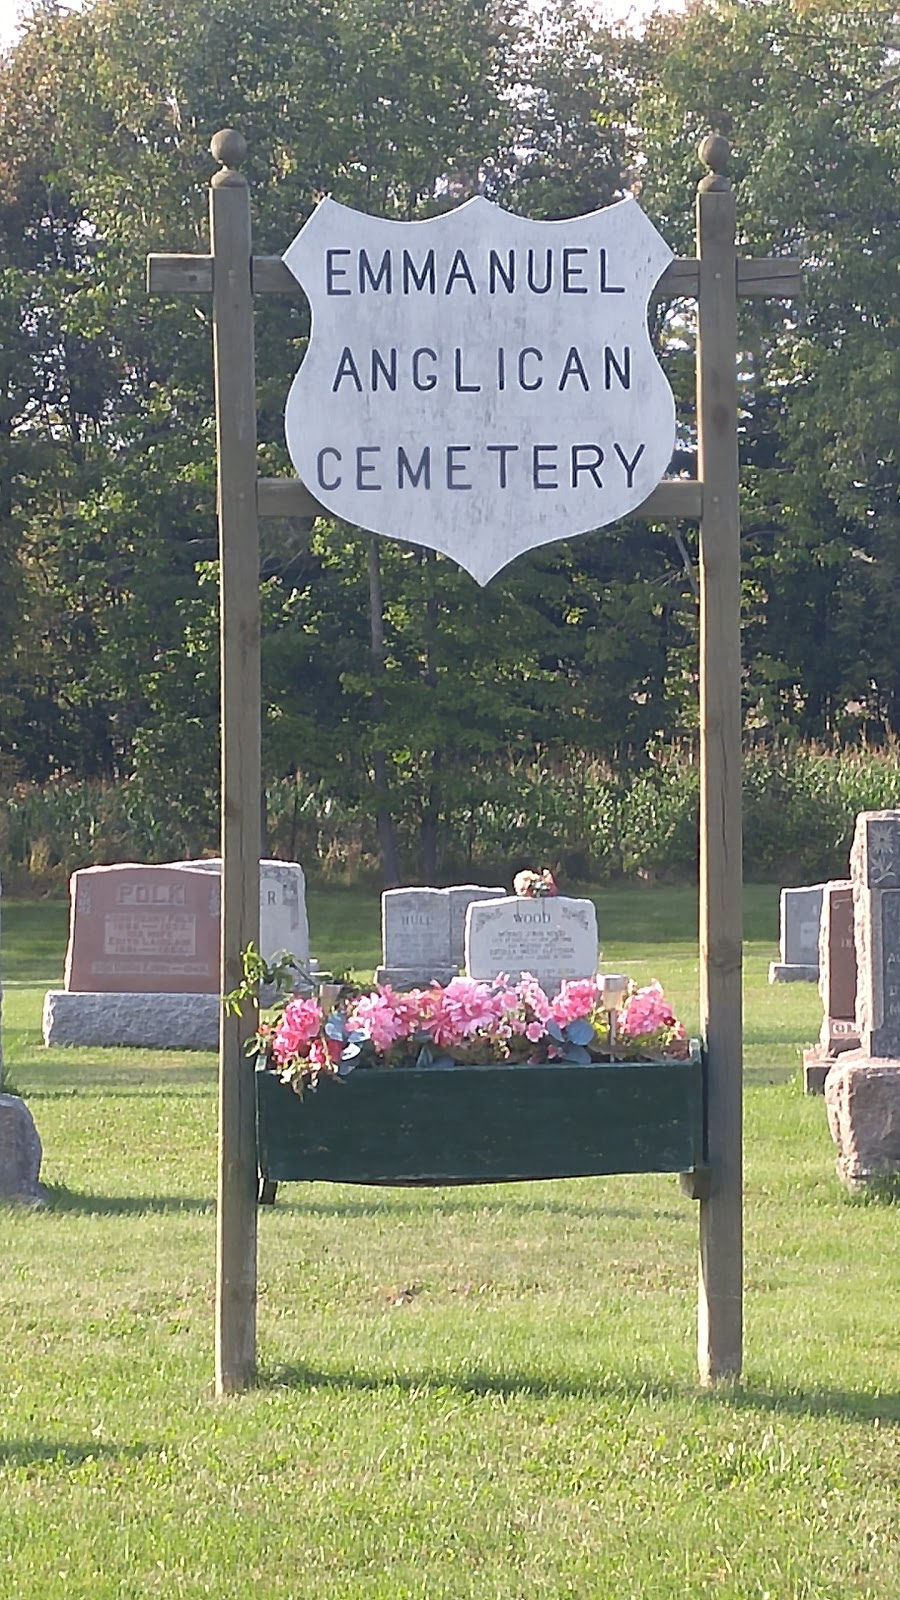 Emmanuel Anglican Cemetery | Rideau Lakes, ON K0G 1V0, Canada